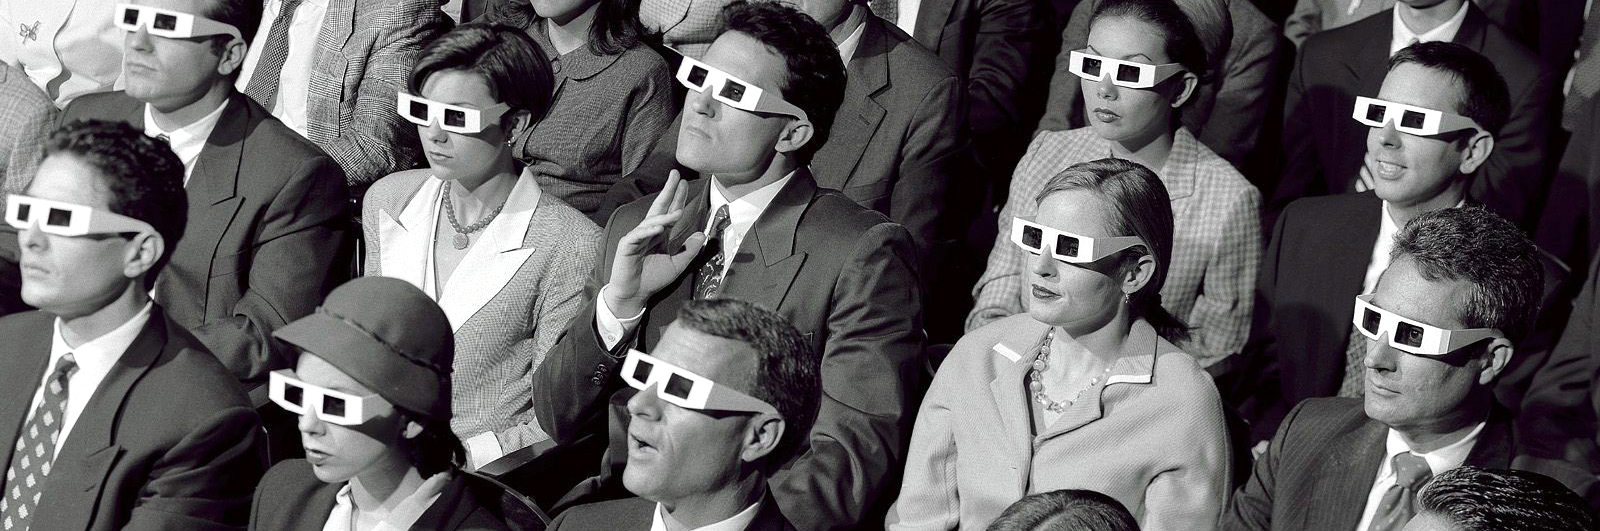 audience-with-3d-glasses 2